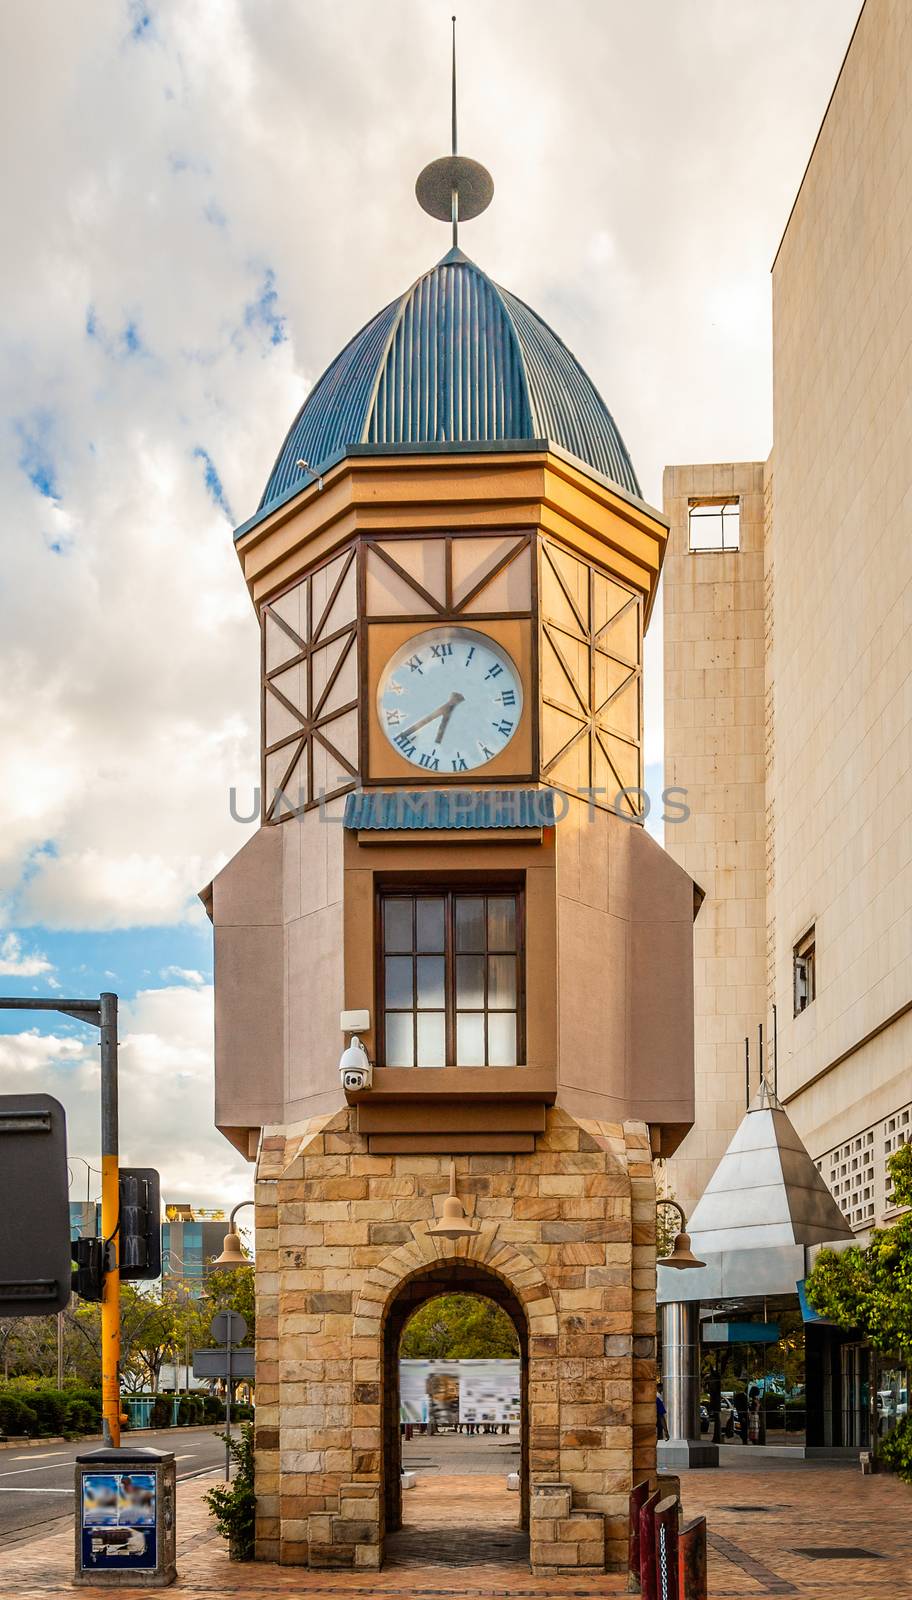 Clock tower on the street in city center of  Windhoek, Namibia by ambeon